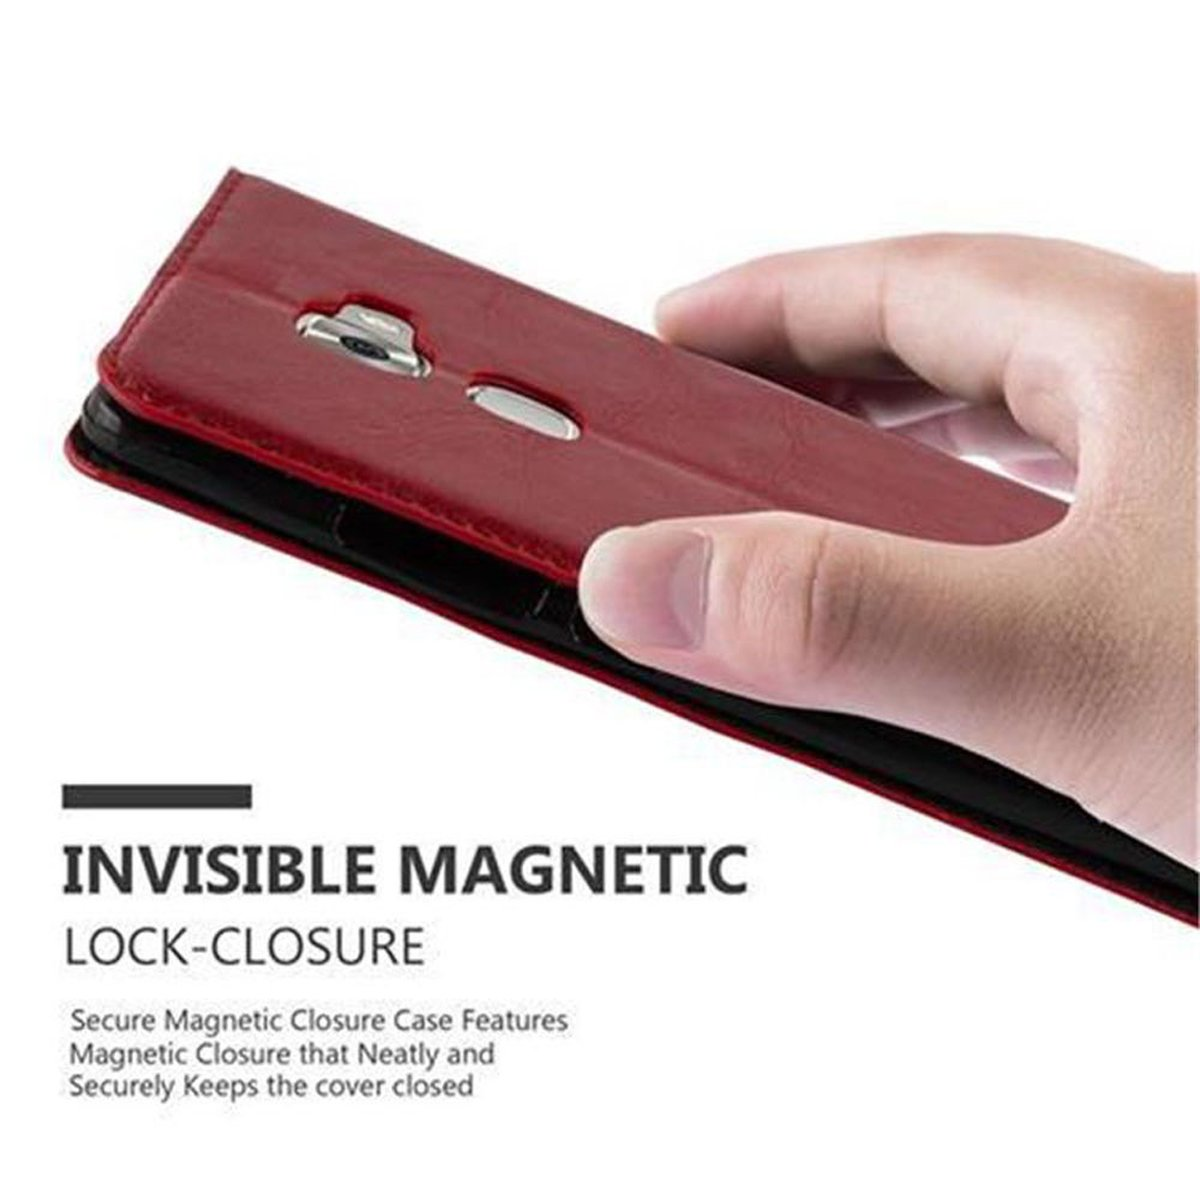 Magnet, ROT MATE APFEL Bookcover, Invisible Book CADORABO Hülle Huawei, S,